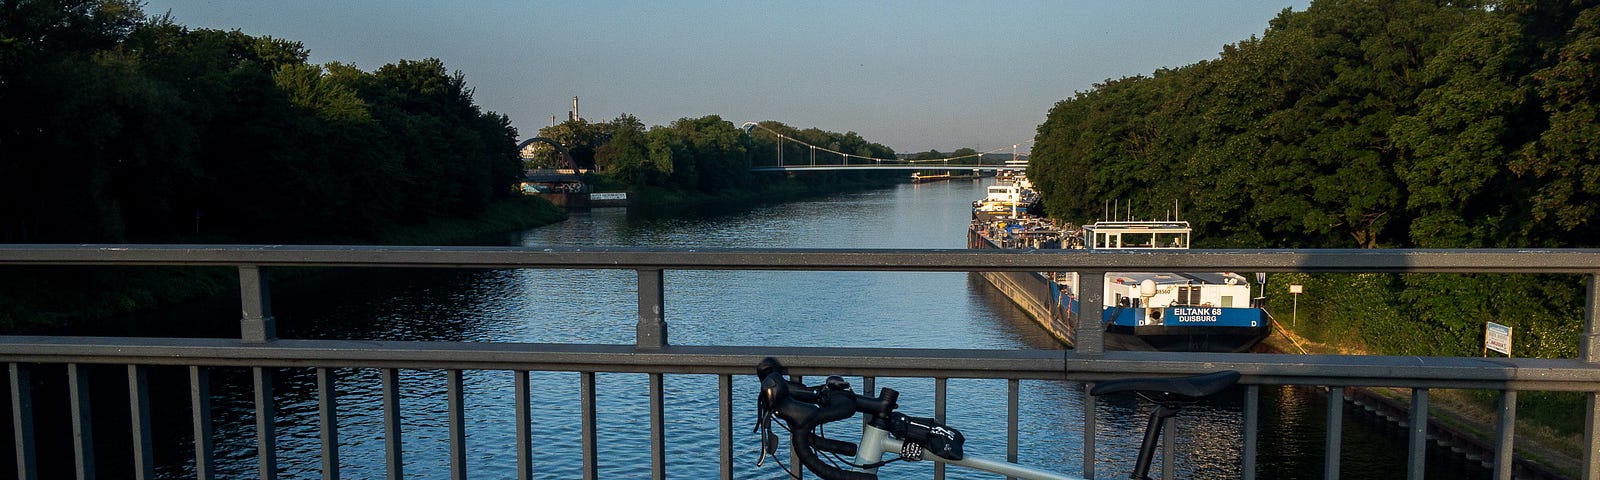 View over the Rhein-Herne canal near the lock Gelsenkirchen — nearly the halfway point of a relaxed 50 km route that guided me through five cities. Gelsenkirchen, Germany, May 28, 2023.